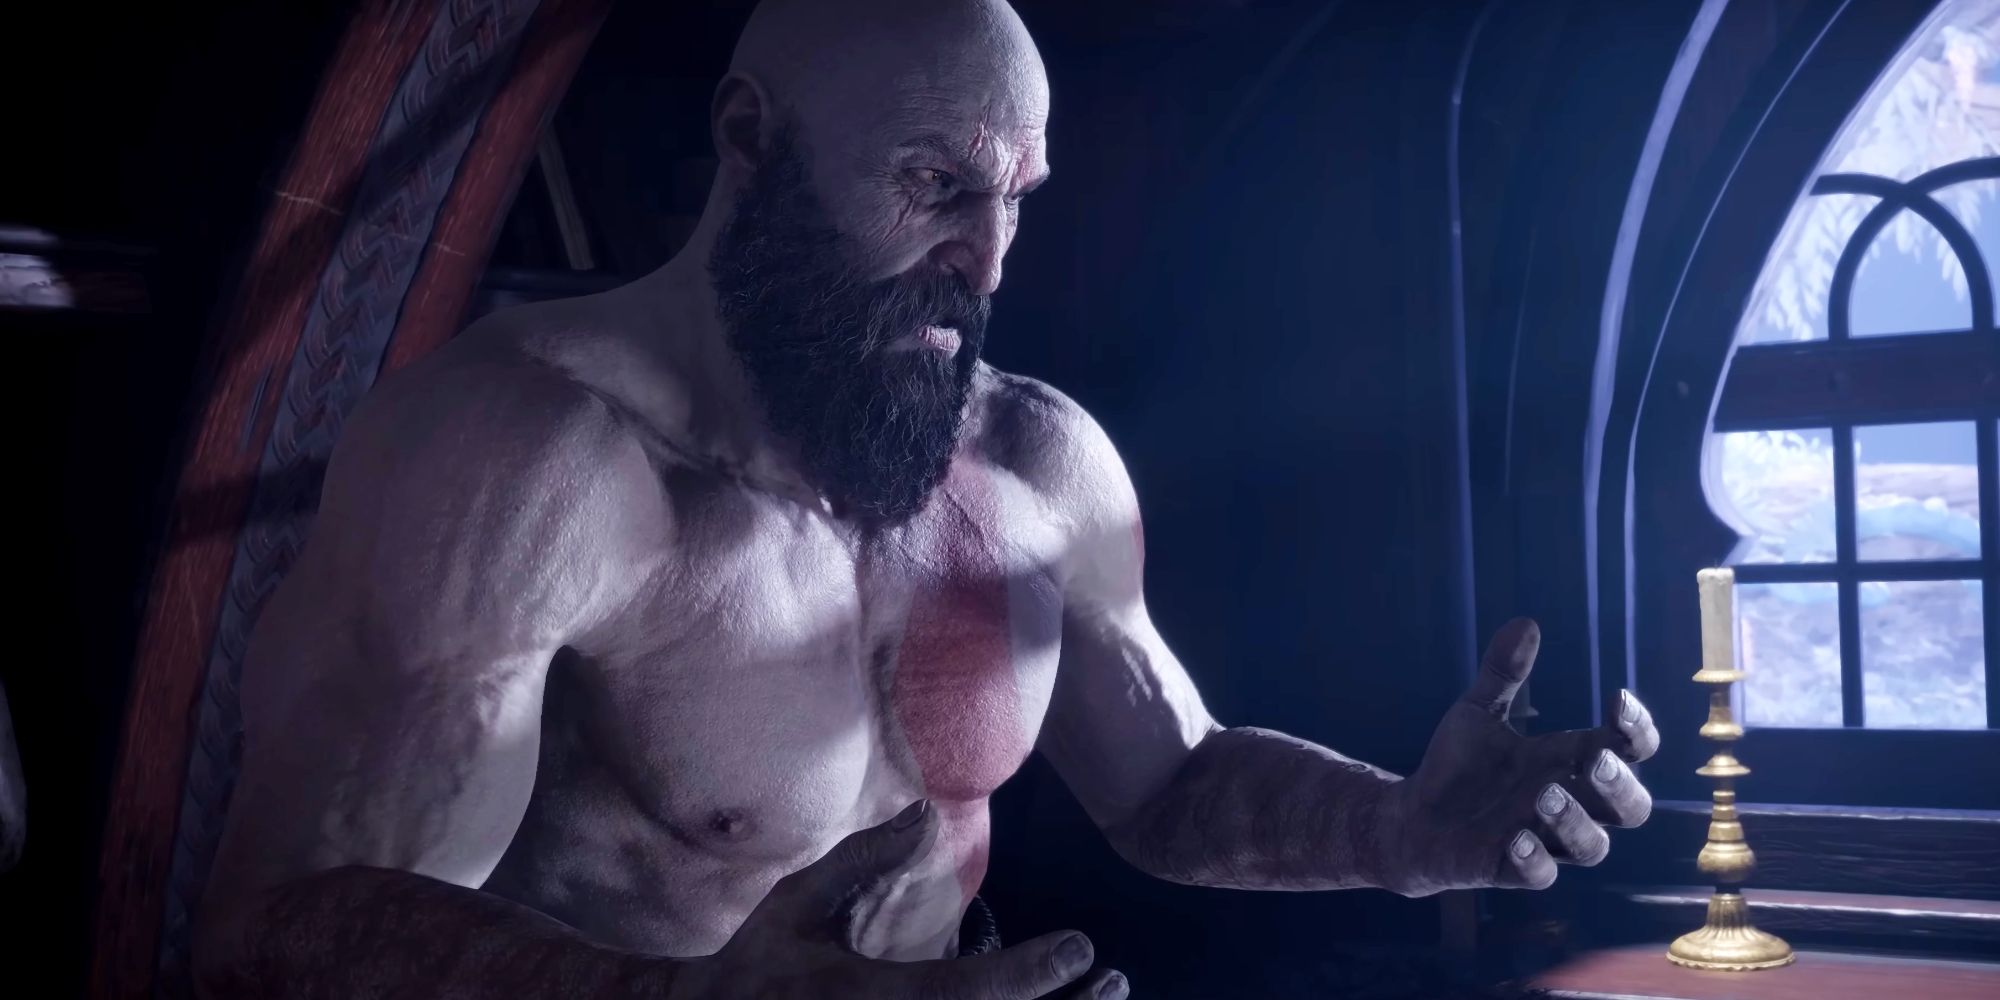 God of War Ragnarok's Kratos sitting on his bed in Sindri's house, looking at his hands.